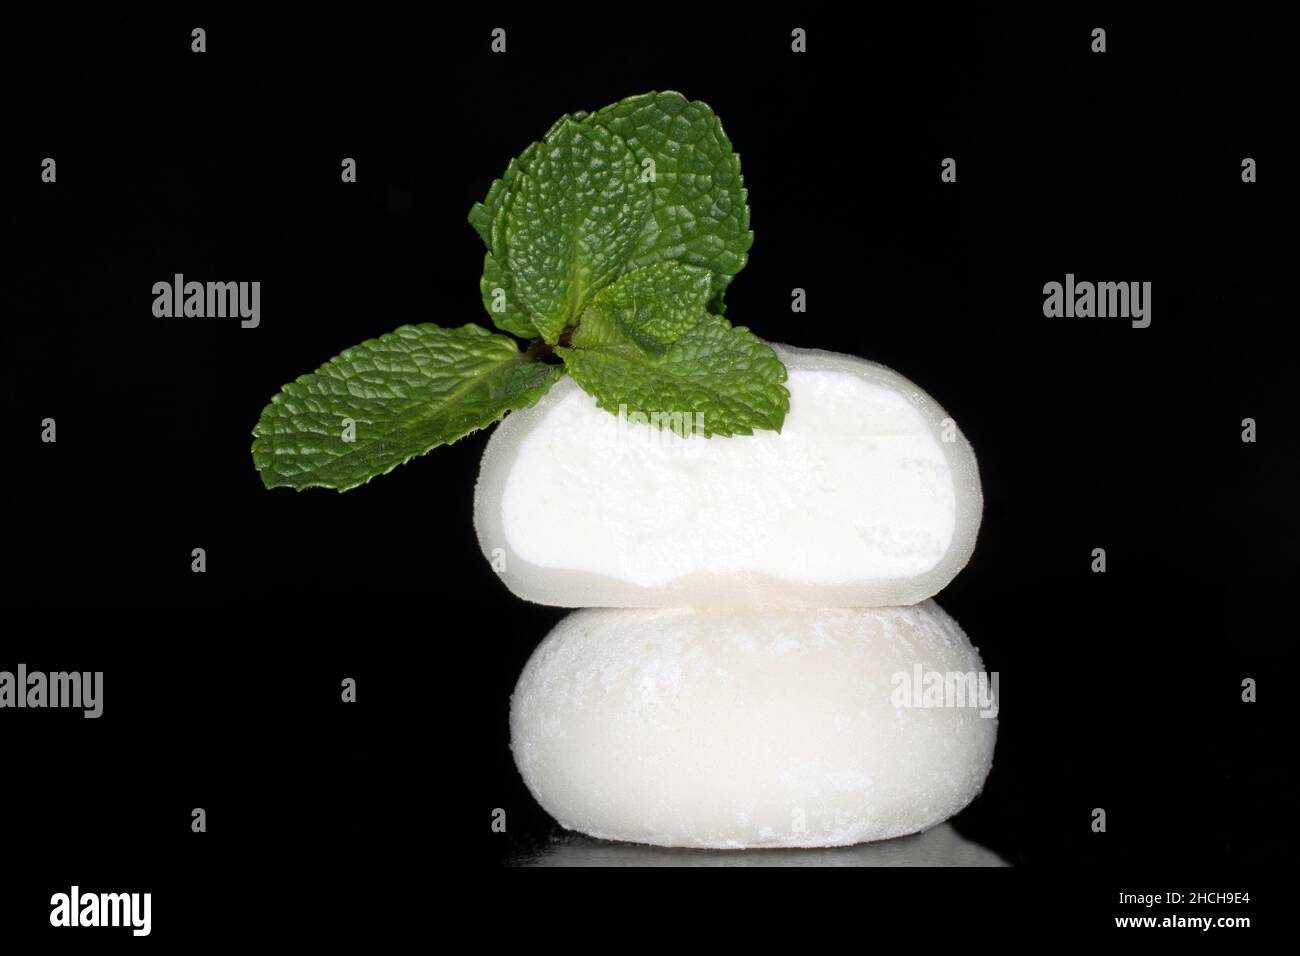 Halved mochi (cake made from glutinous ice cream flour) and mint, filled with coconut ice cream, studio photography with a black background Stock Photo